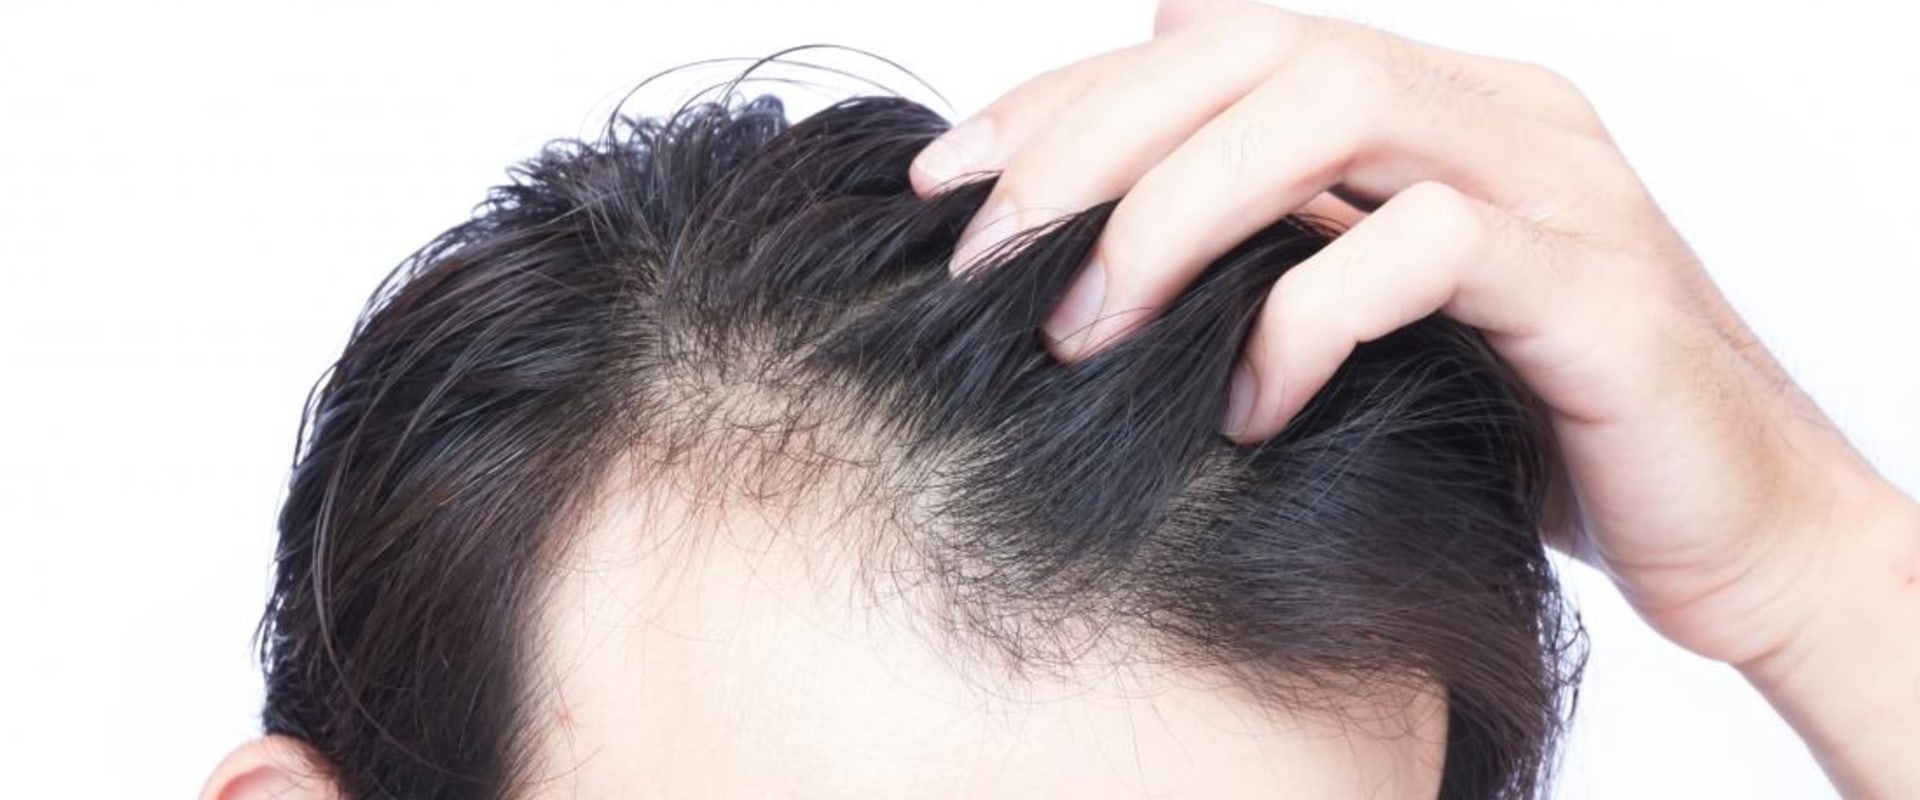 How do I know if hair loss is permanent?